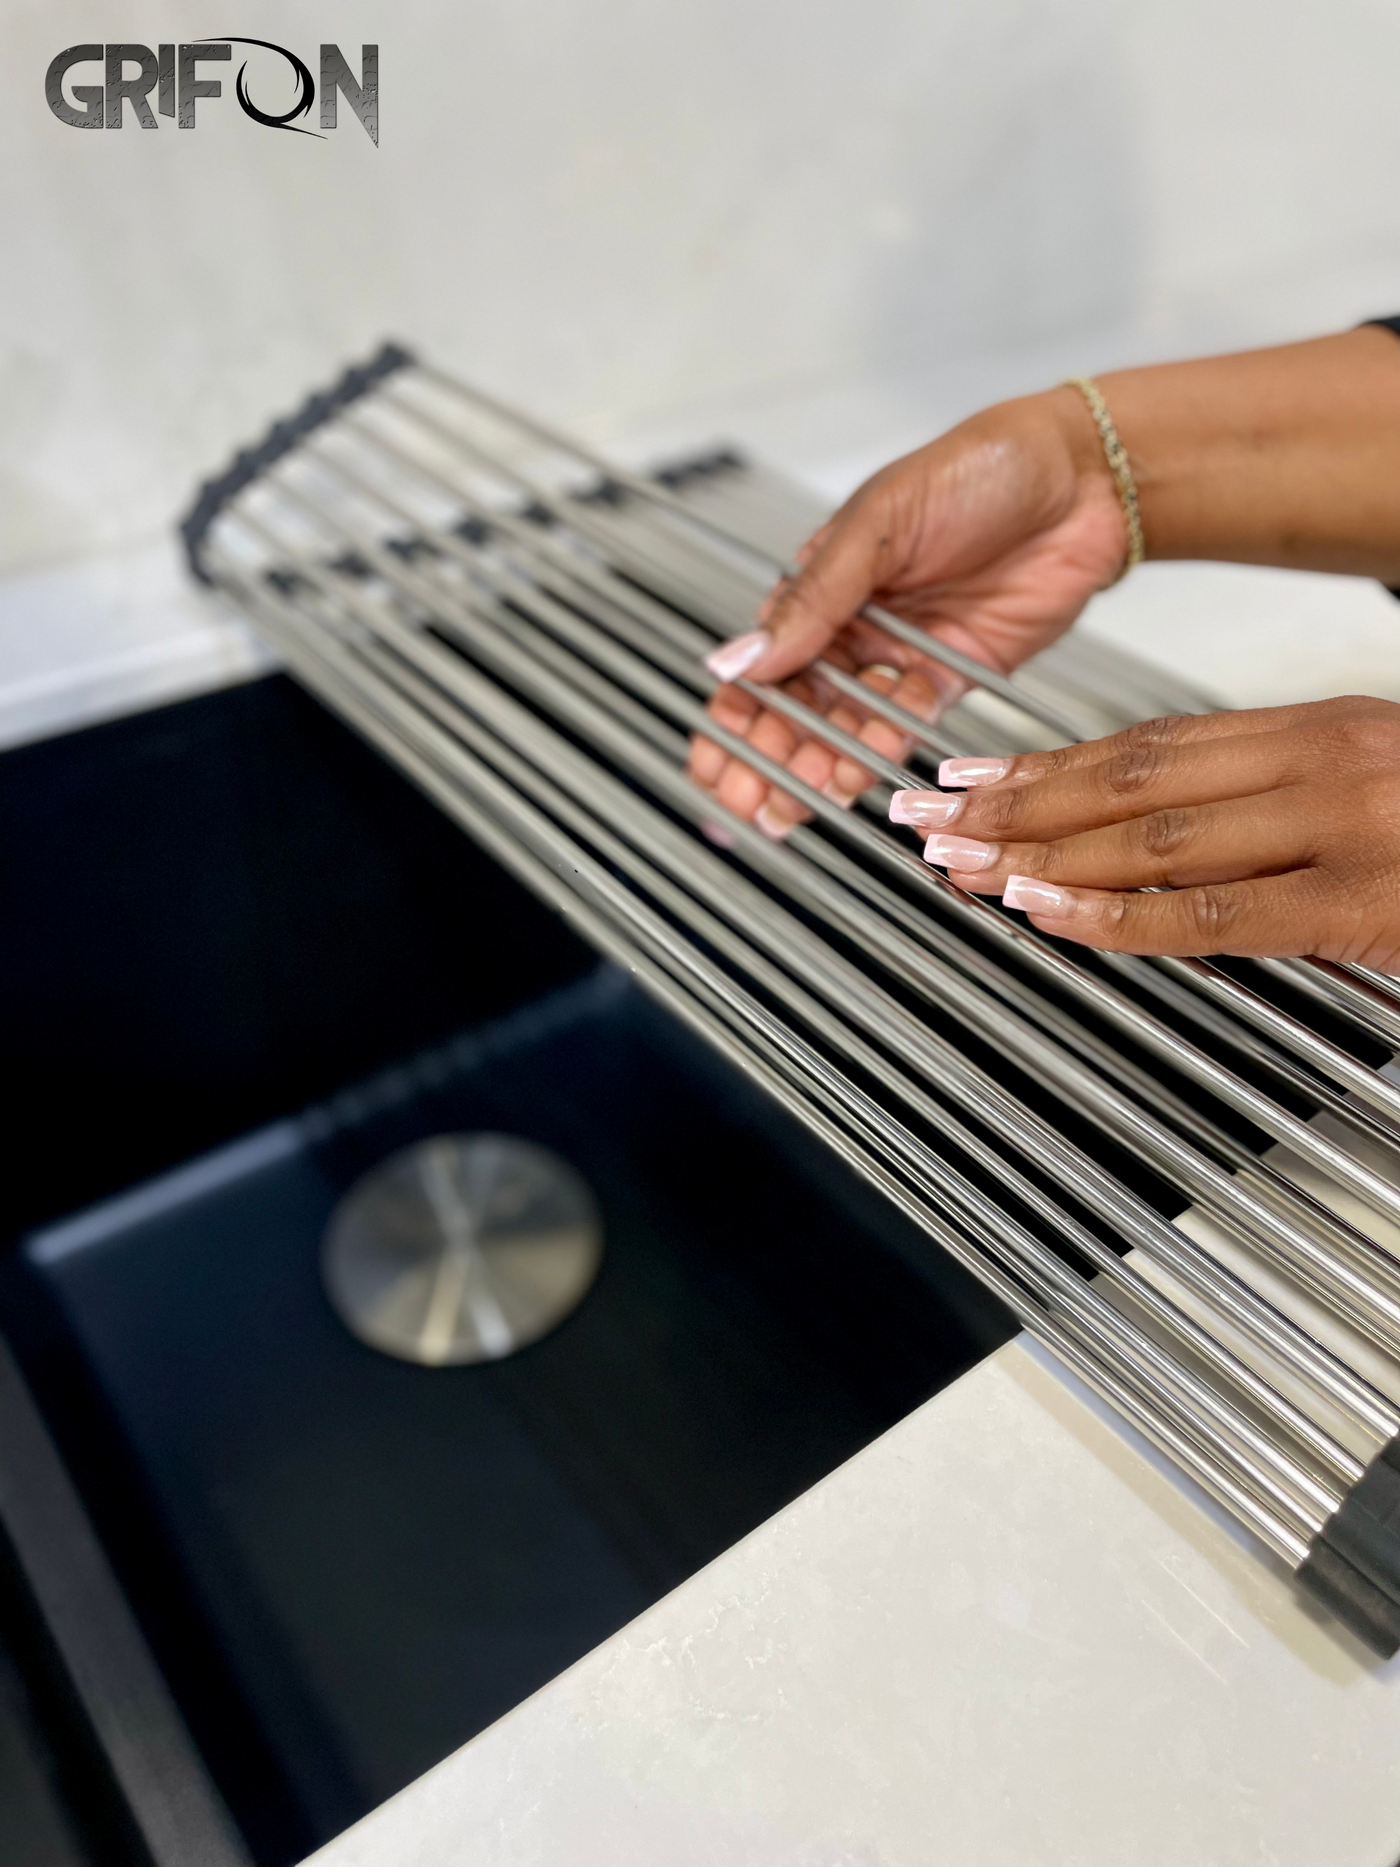 Multipurpose Over-Sink Roll-up Drying Rack